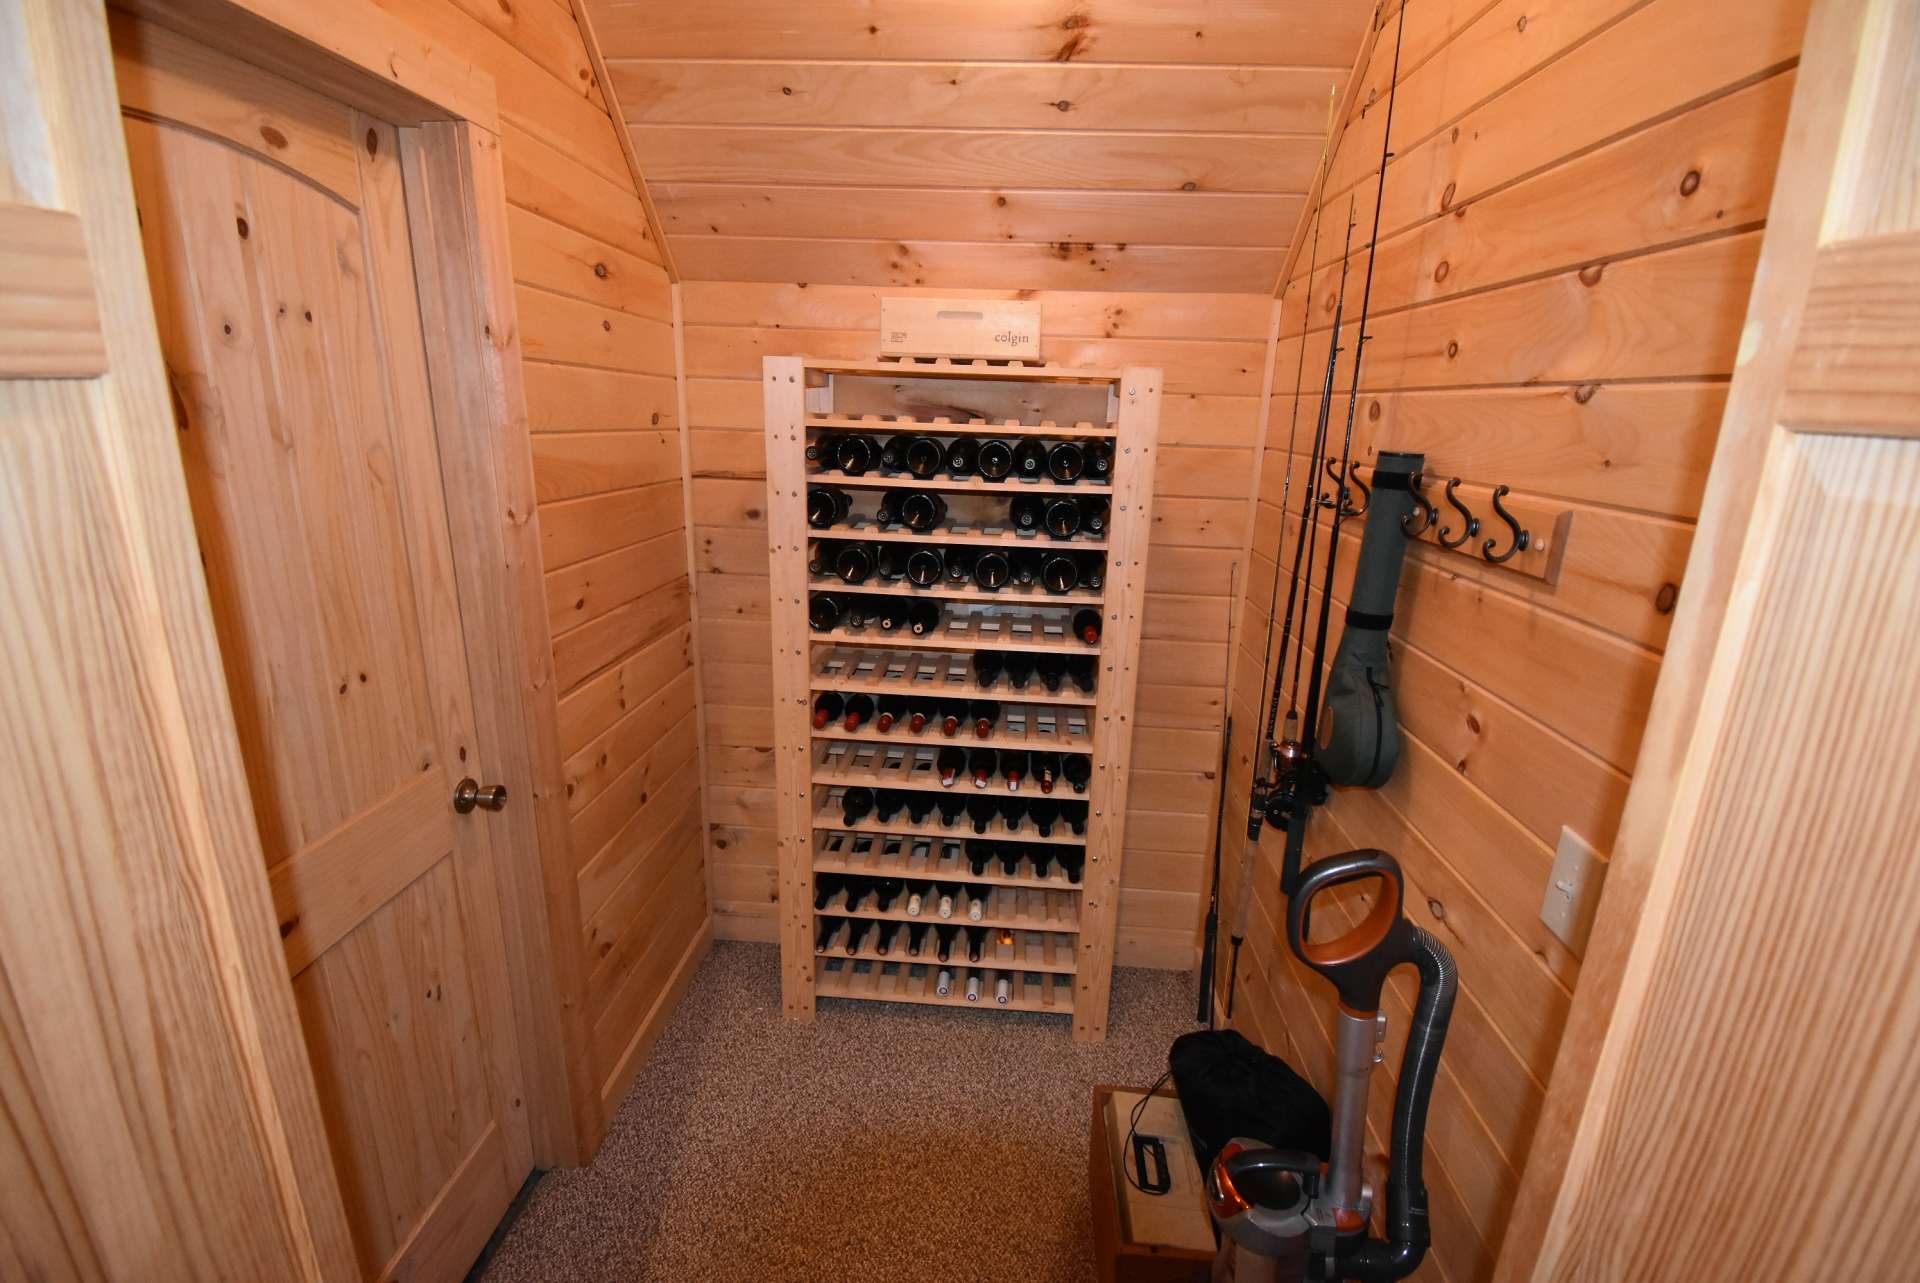 To complete the lower level is this wine closet for your favorite or collectable wines.